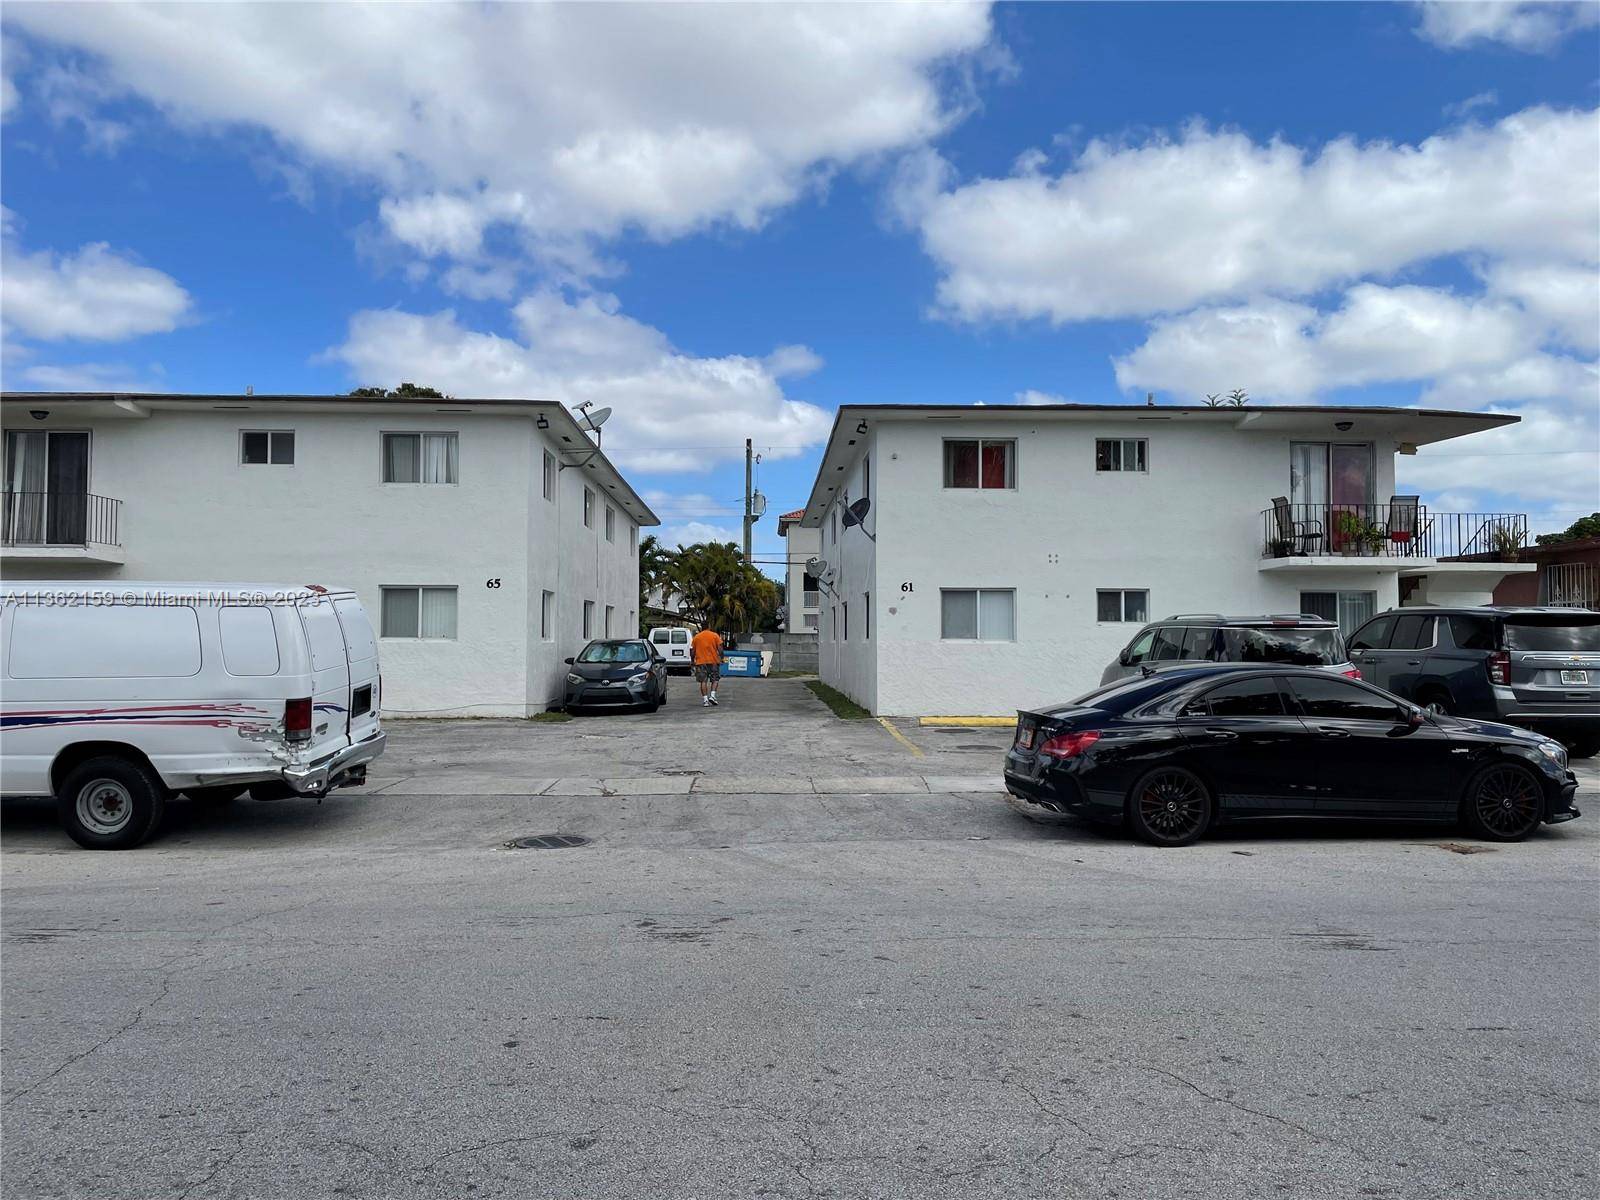 FOR SALE A total of 8 units in 2 buildings in Hialeah, all the units are 2 bedrooms and 1 bathroom with an average of 840 SQ FT per unit.